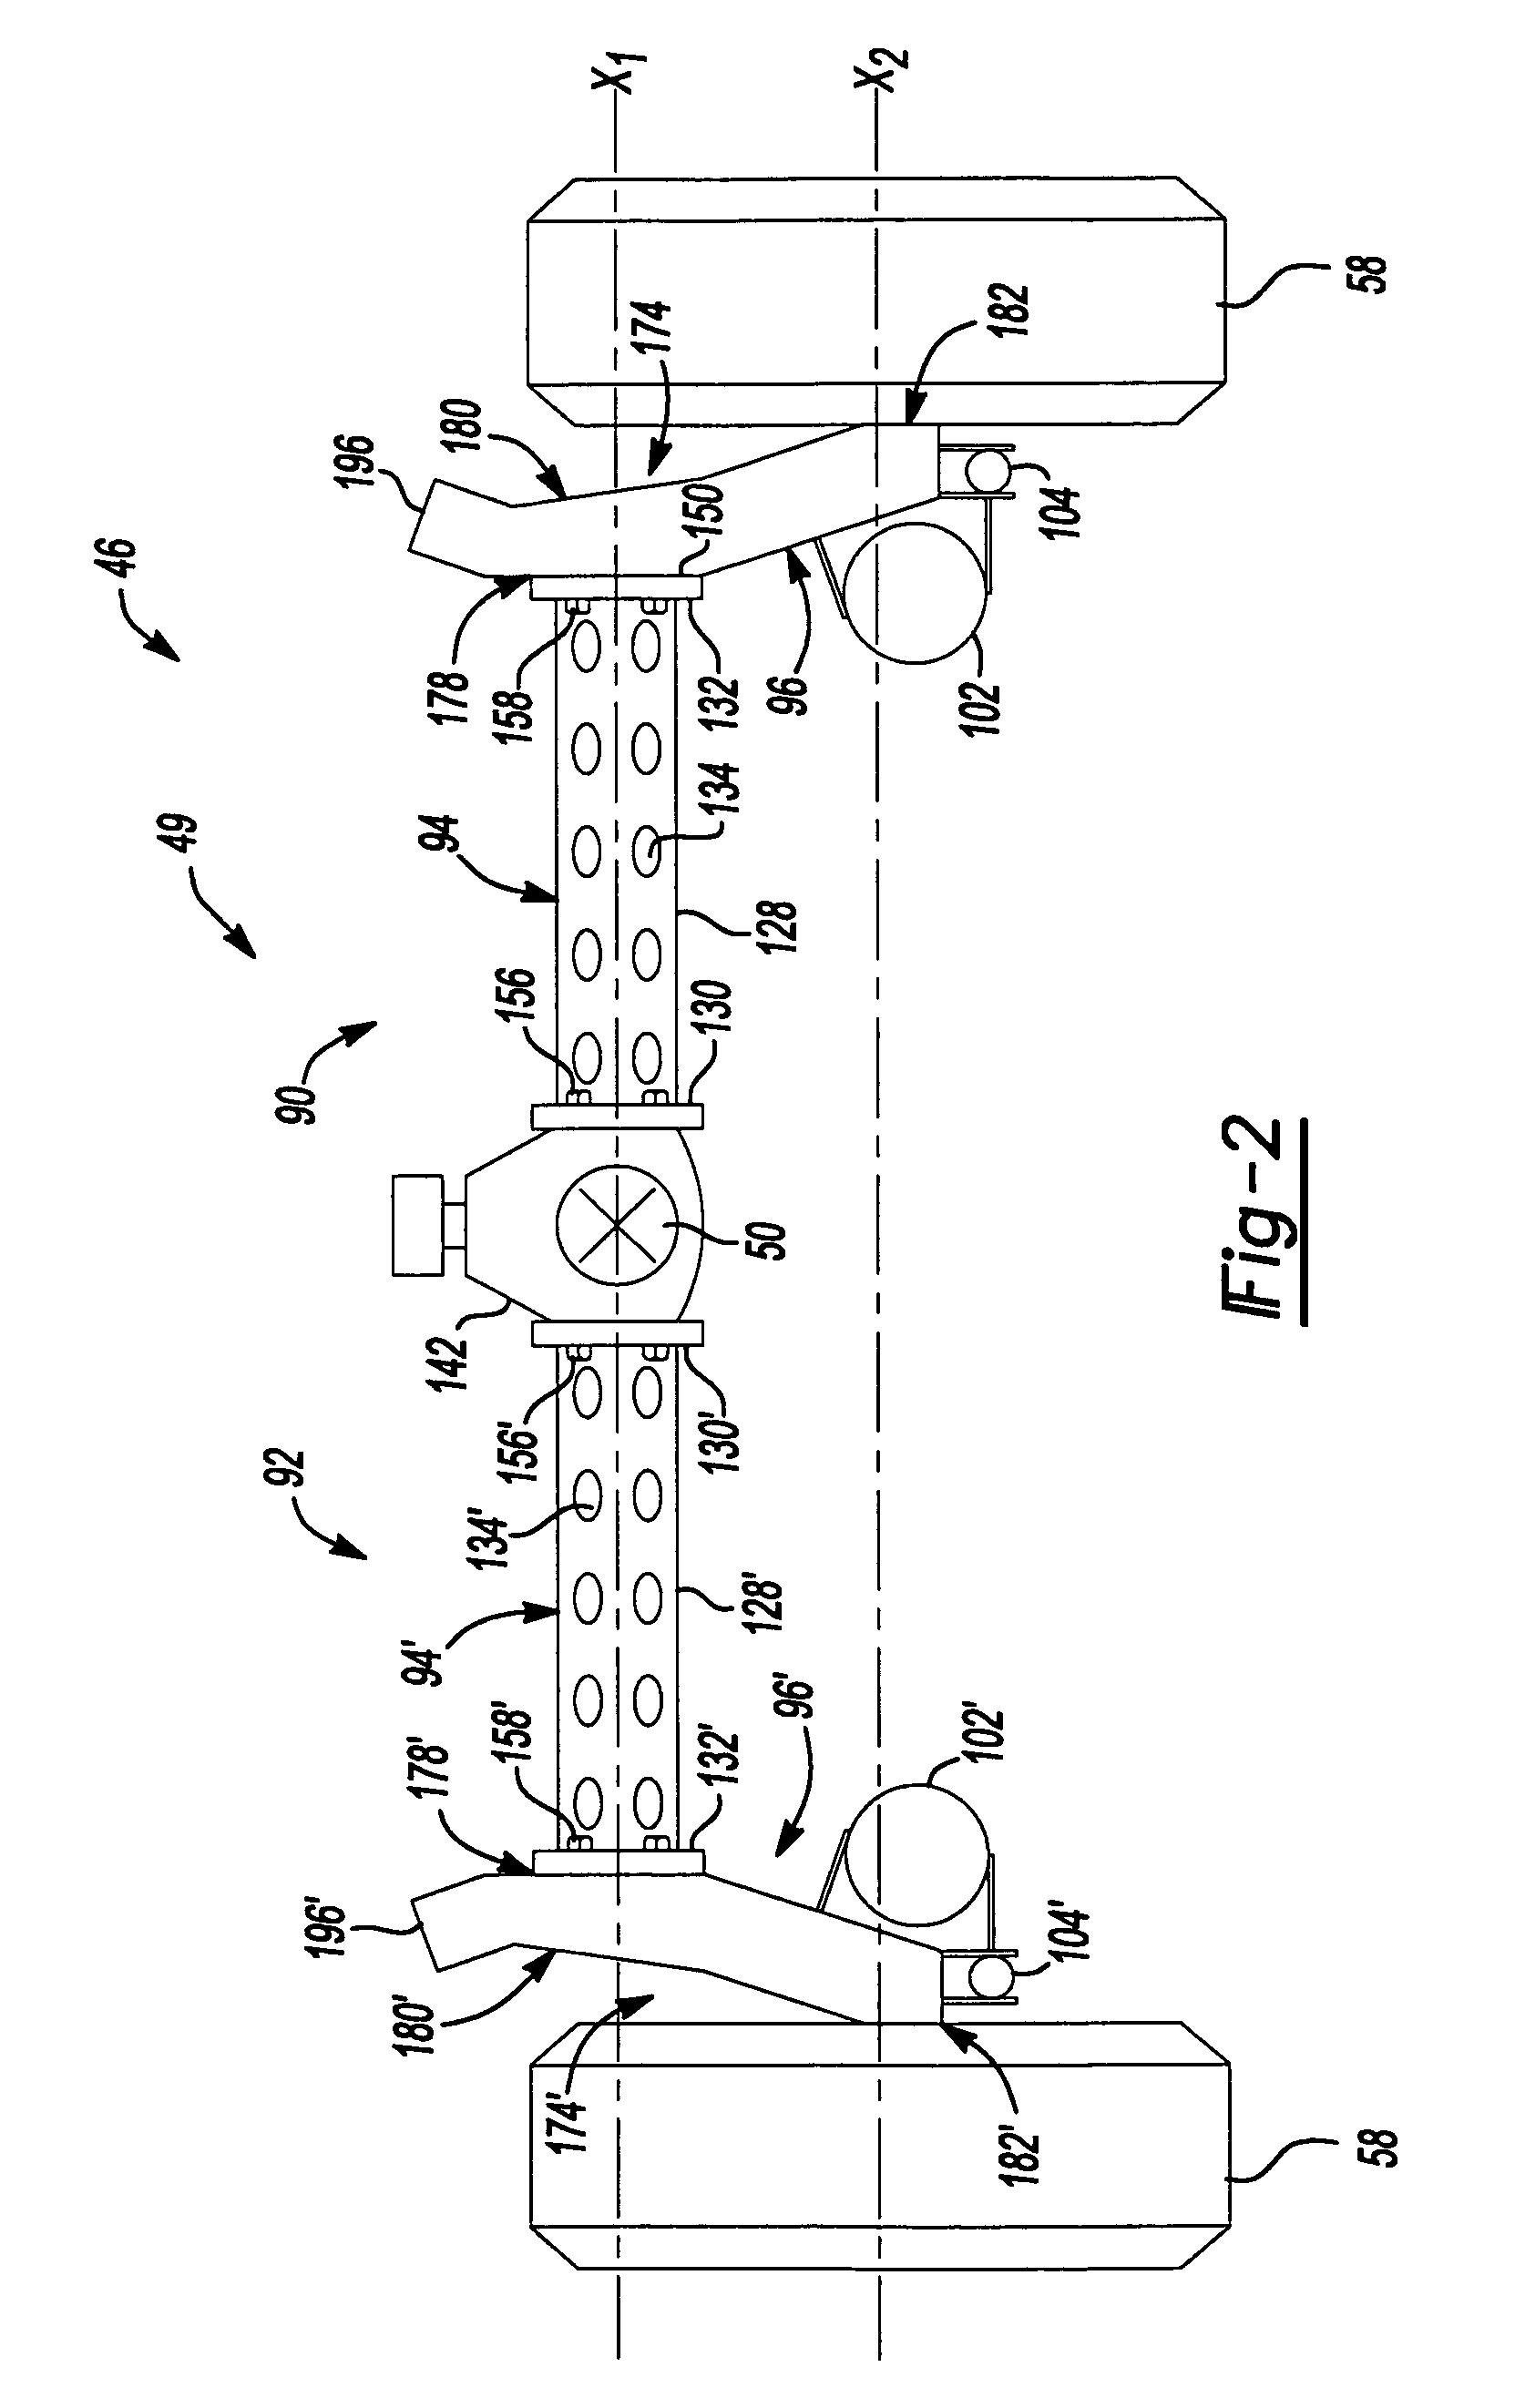 Live twist beam axle assembly